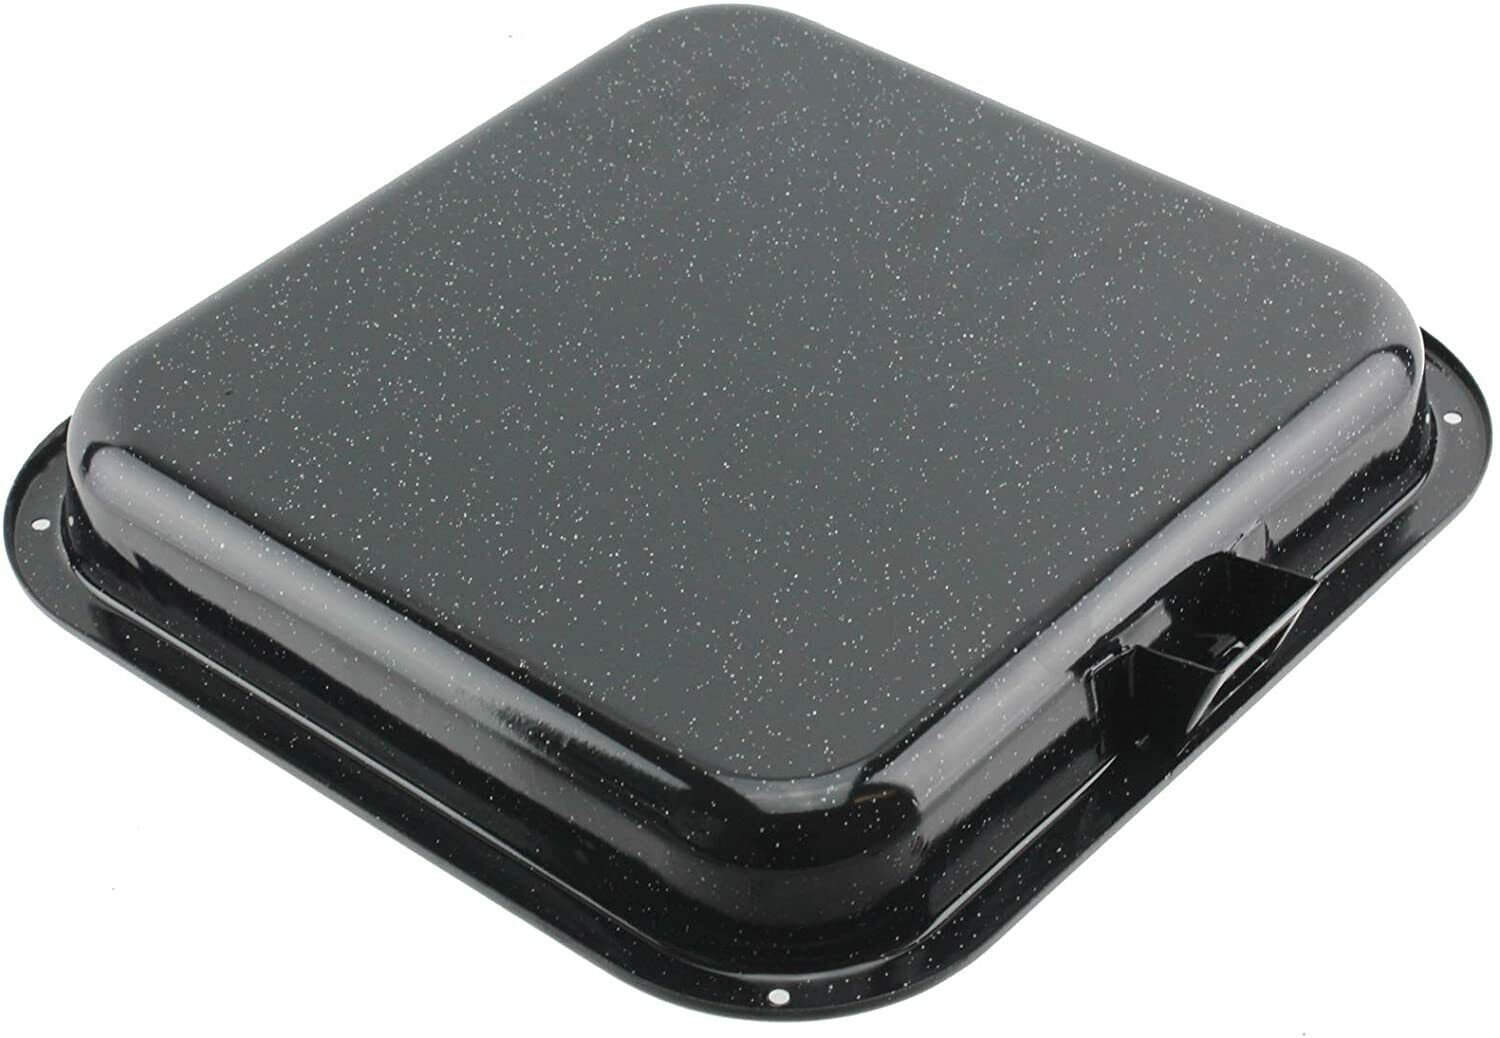 Outer side of black enameled finish grill pan